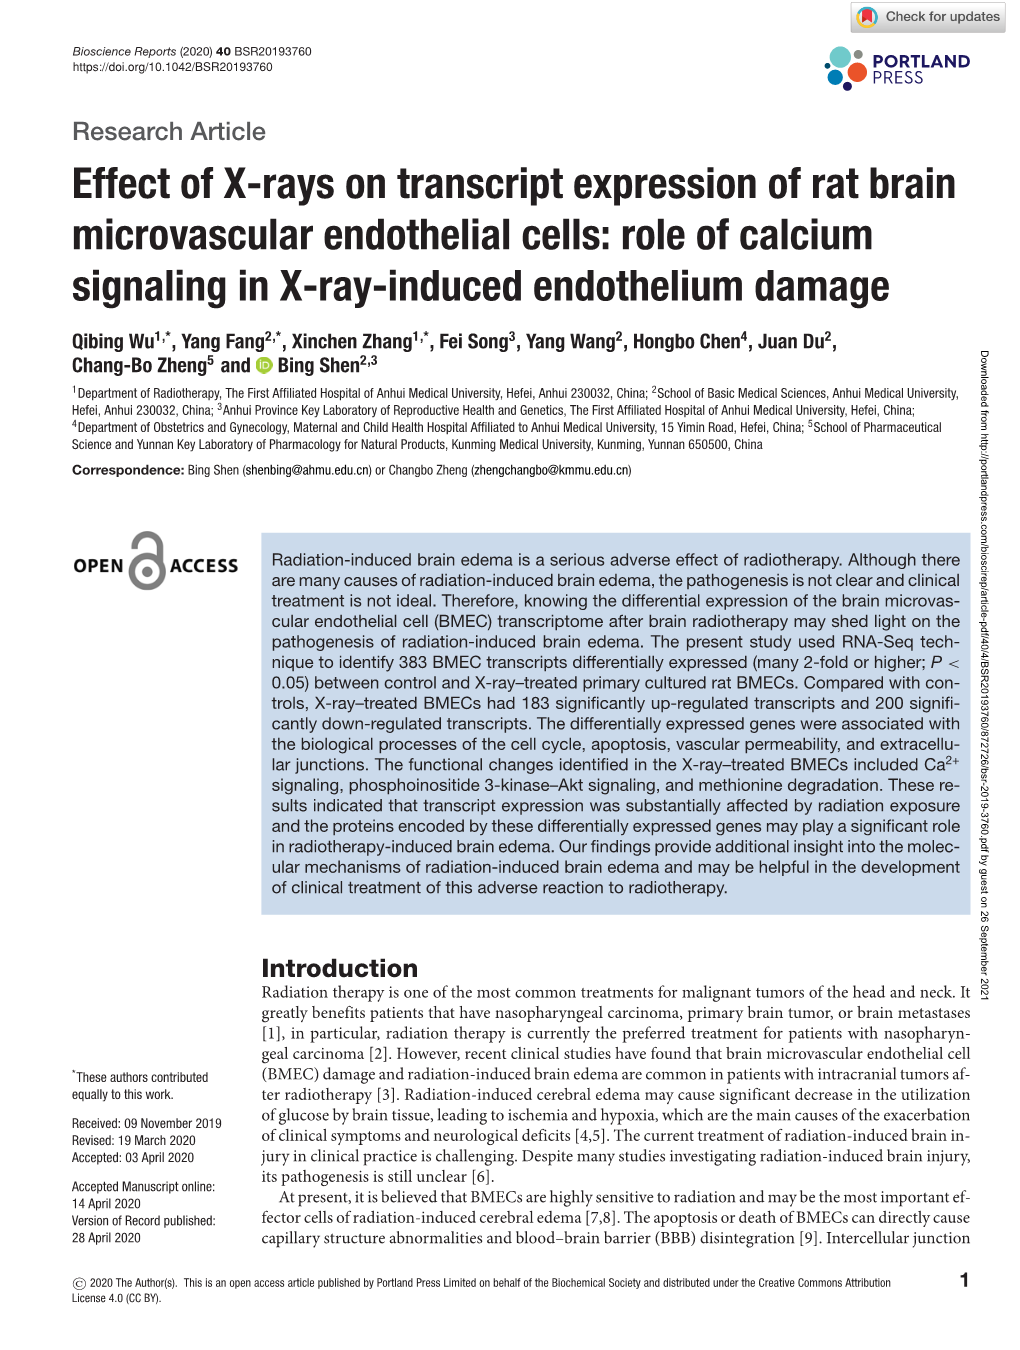 Effect of X-Rays on Transcript Expression of Rat Brain Microvascular Endothelial Cells: Role of Calcium Signaling in X-Ray-Induced Endothelium Damage